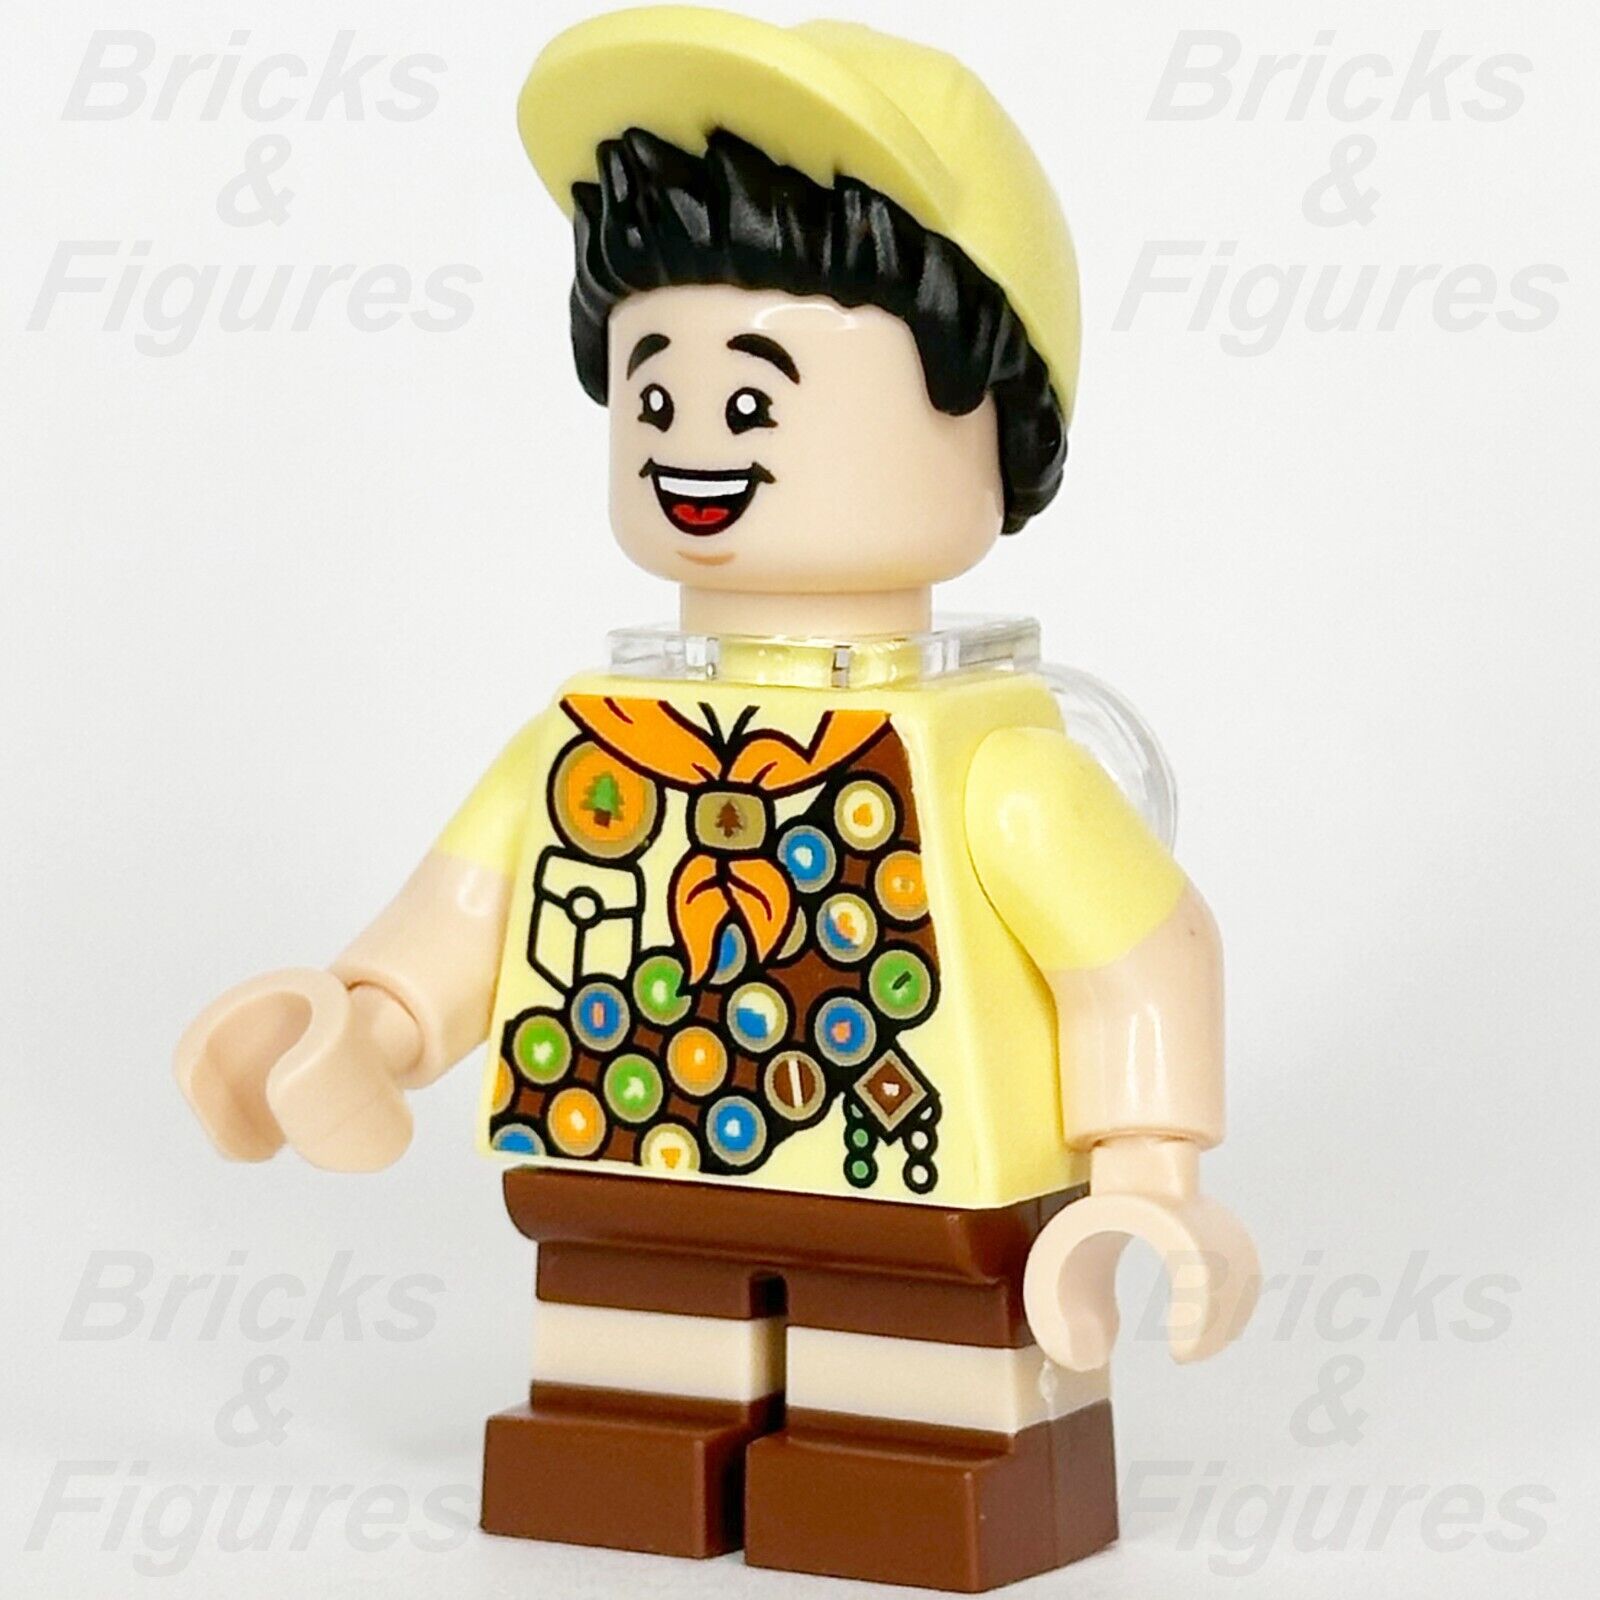 LEGO Disney Russell Minifigure Disney 100 UP 43217 dis090 Young Boy Minifig